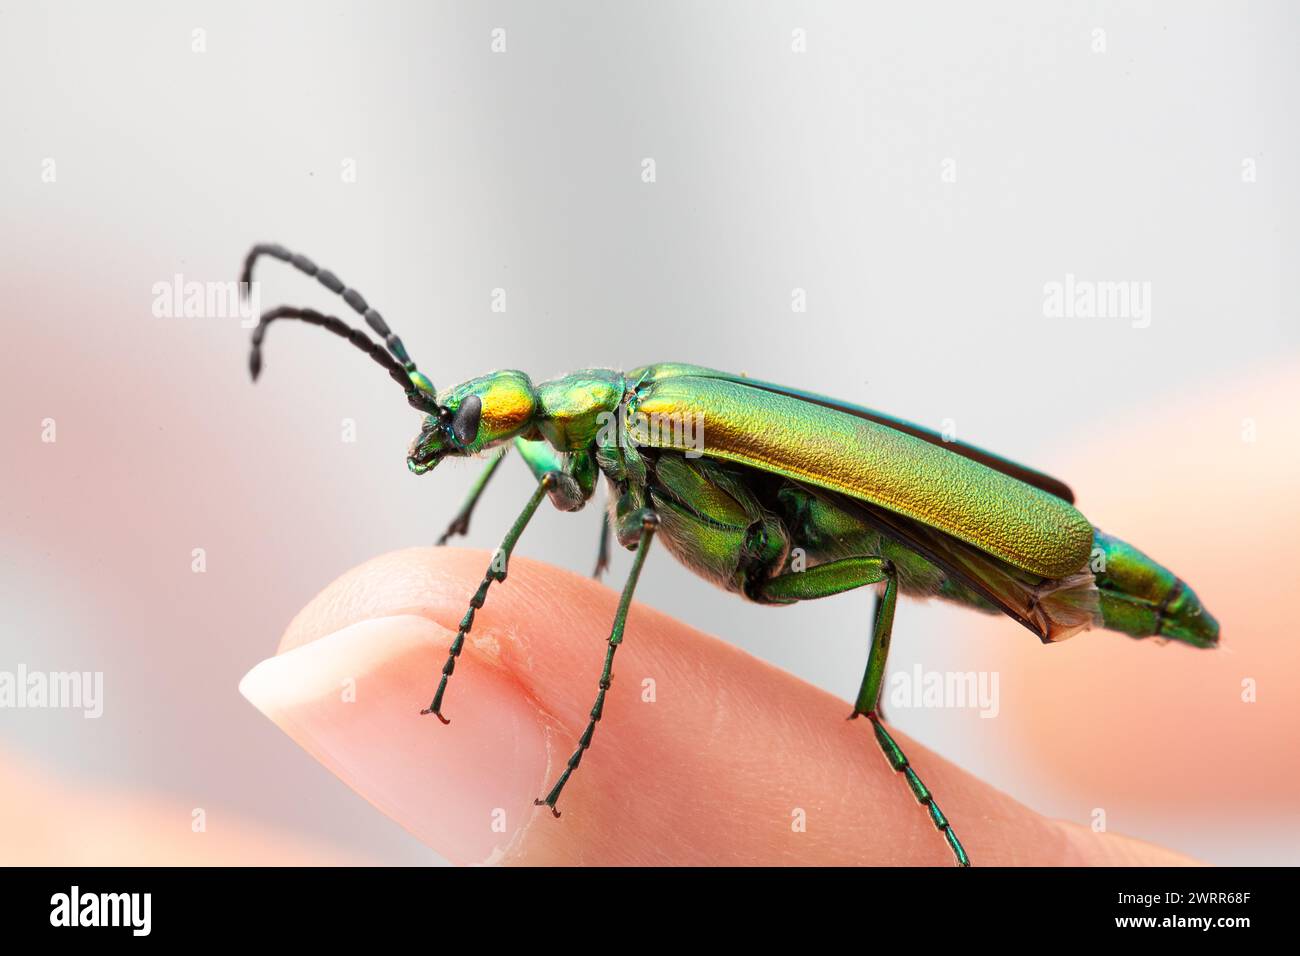 Vivid close-up of a shiny green beetle, with its intricate antennae and exoskeleton details, gently resting on a fingertip, against a soft-focus backg Stock Photo